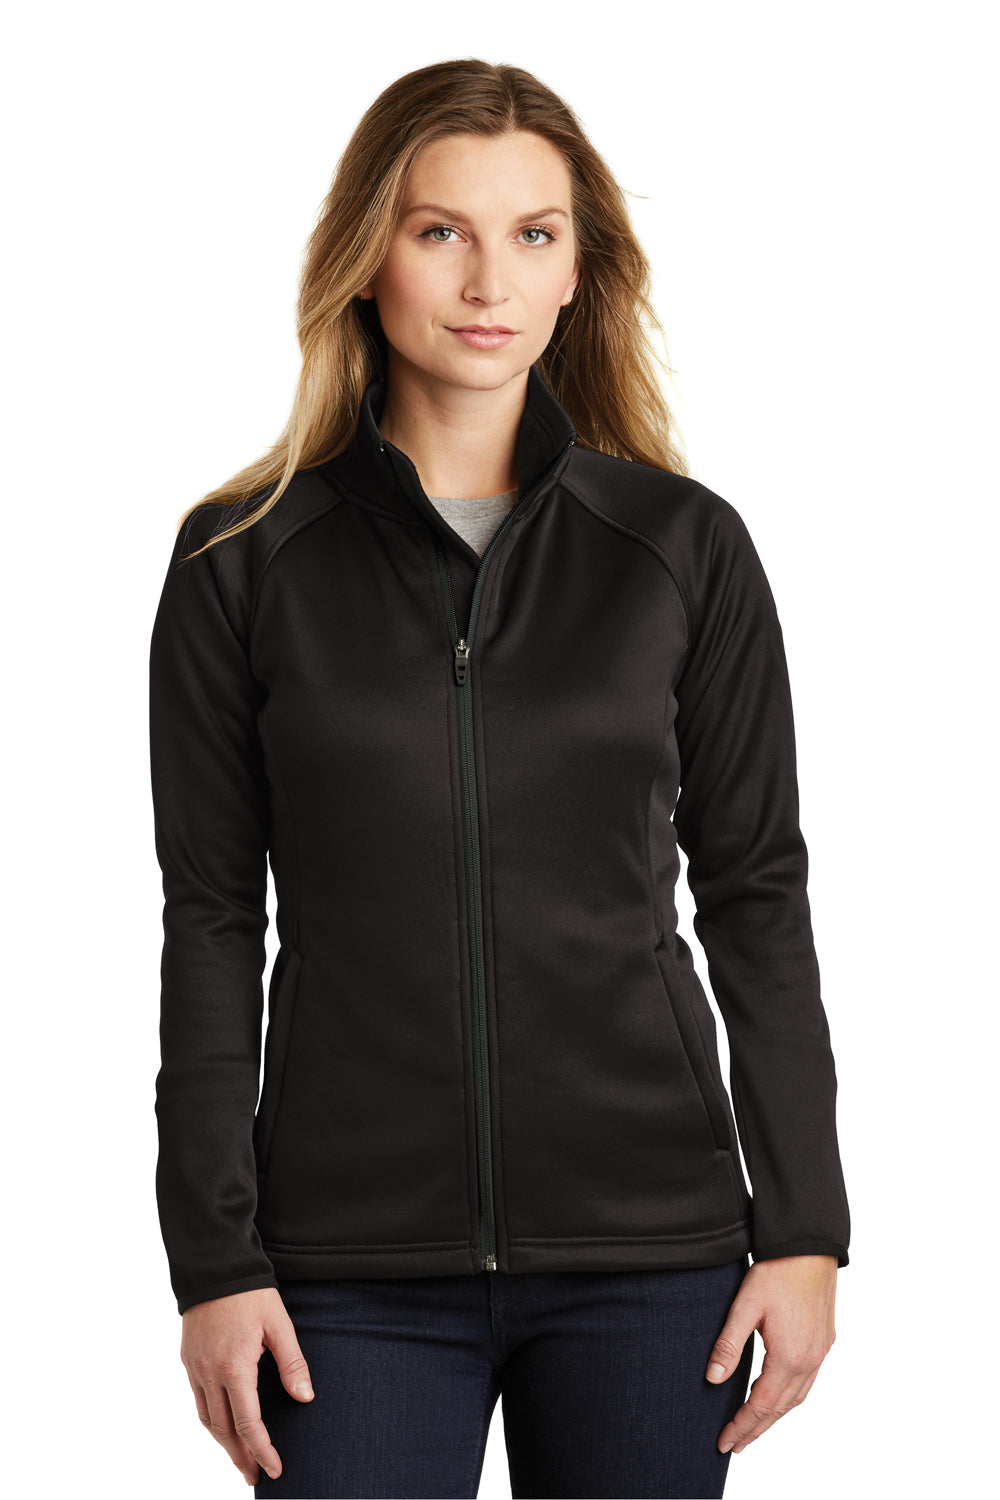 The North Face NF0A3LHA Womens Canyon Flats Full Zip Fleece Jacket Black Front